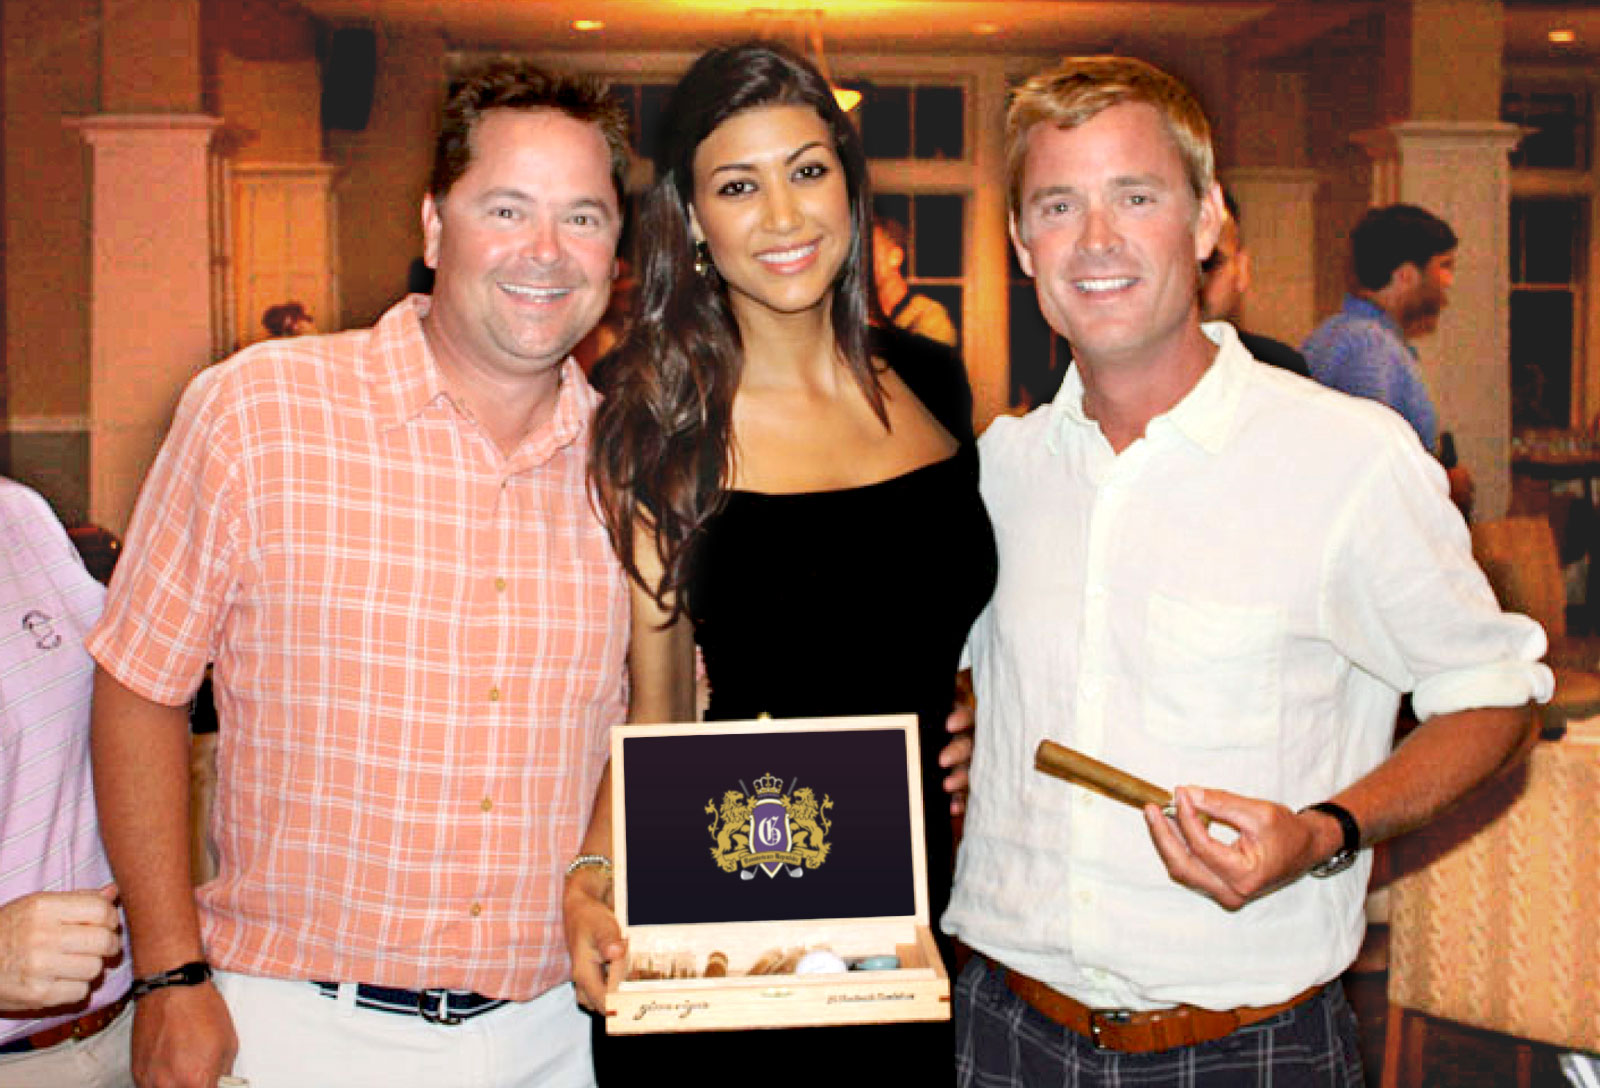 evening events with cigar girls